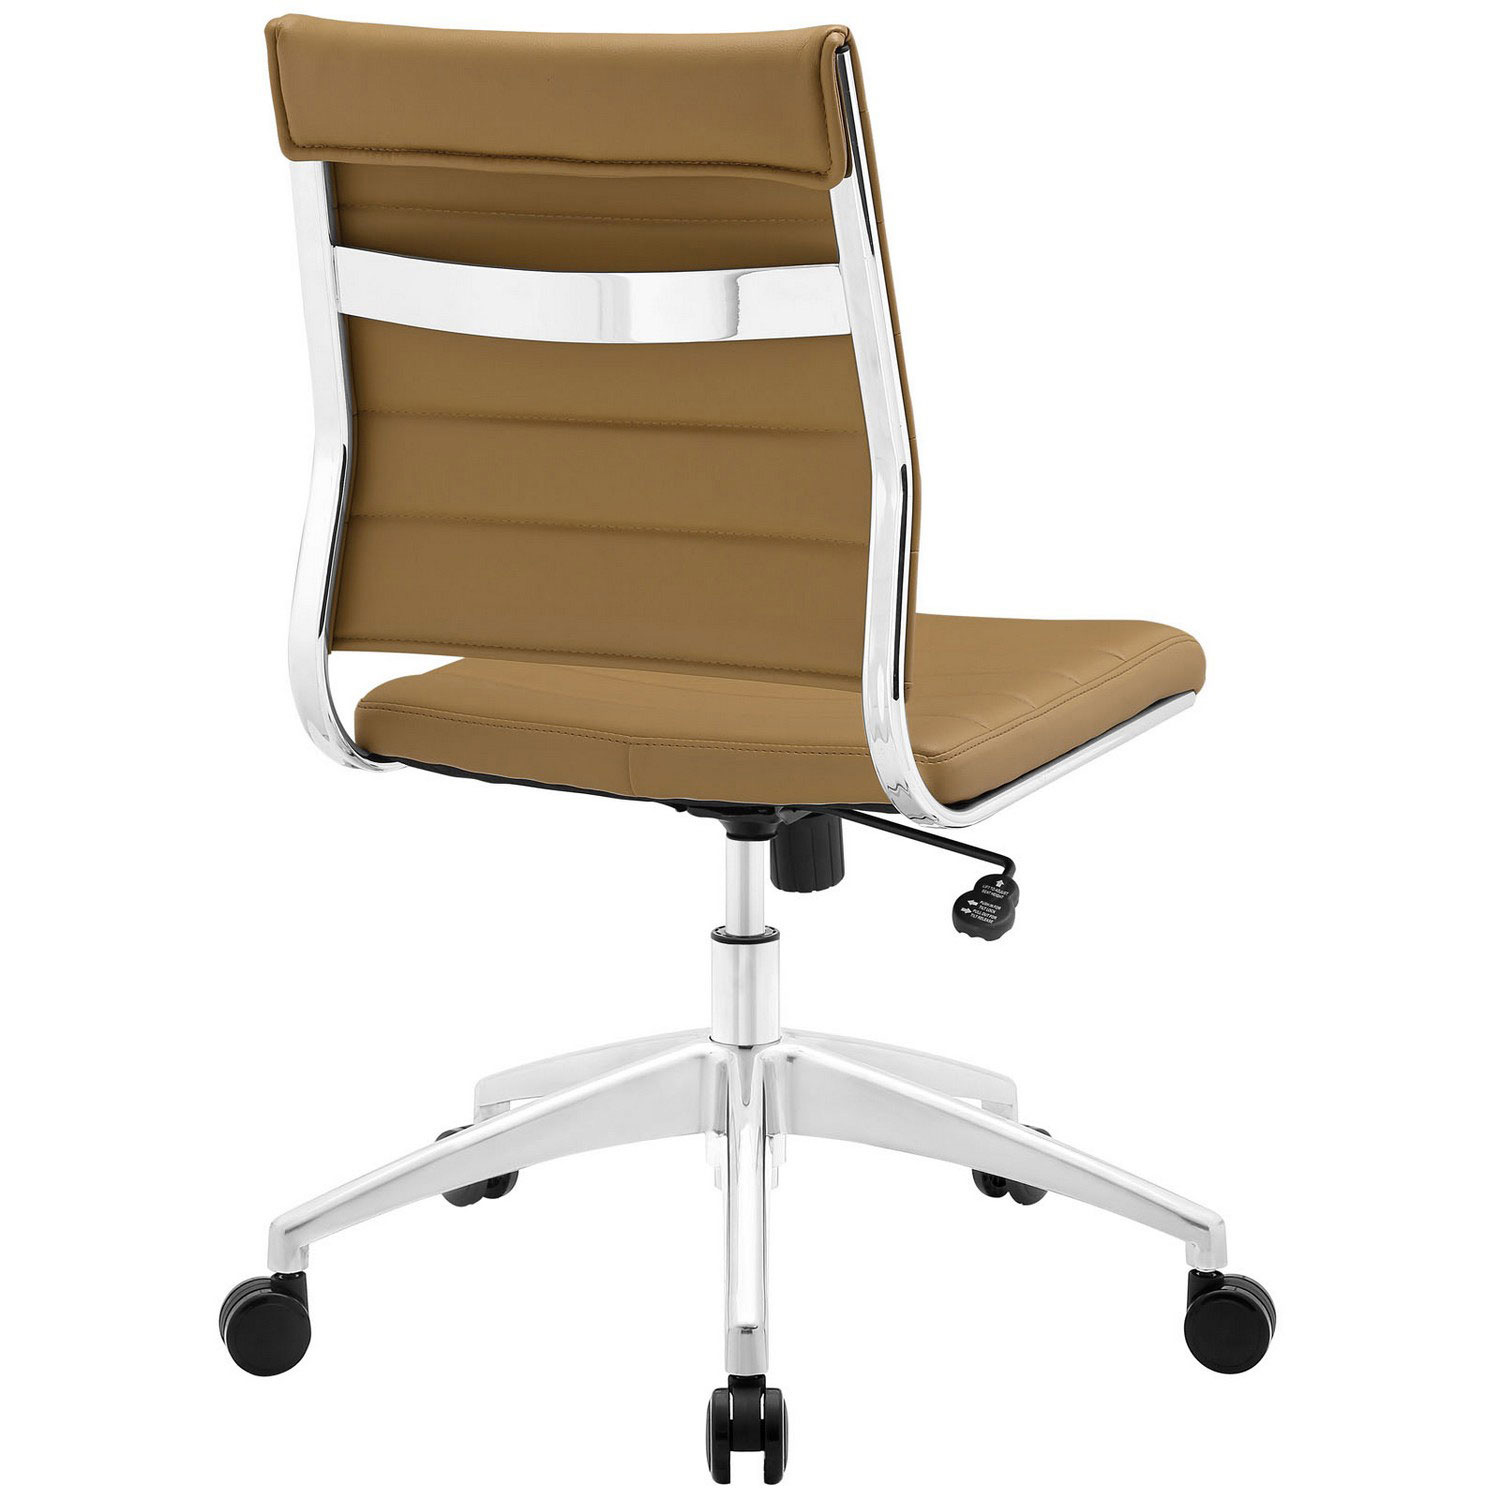 Modway Jive Armless Mid Back Office Chair - Tan